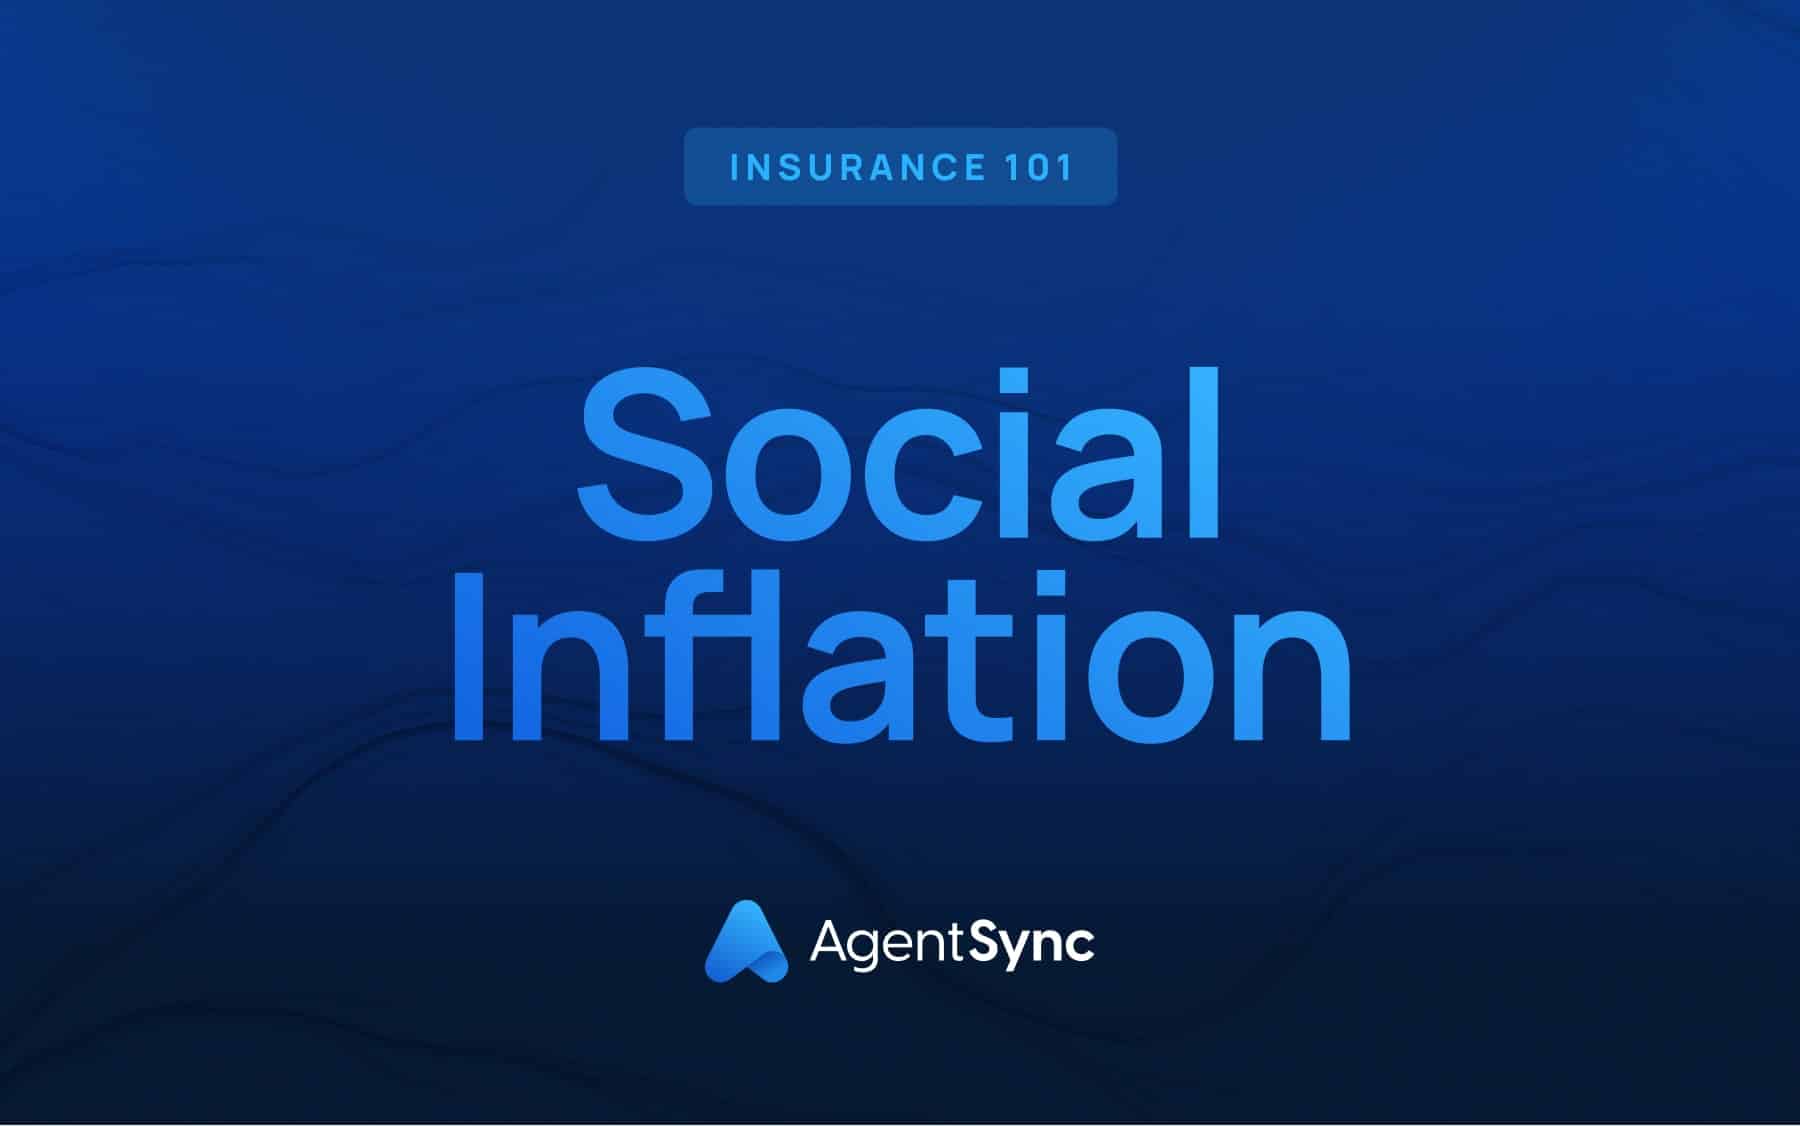 Insurance 101: What is Social Inflation?